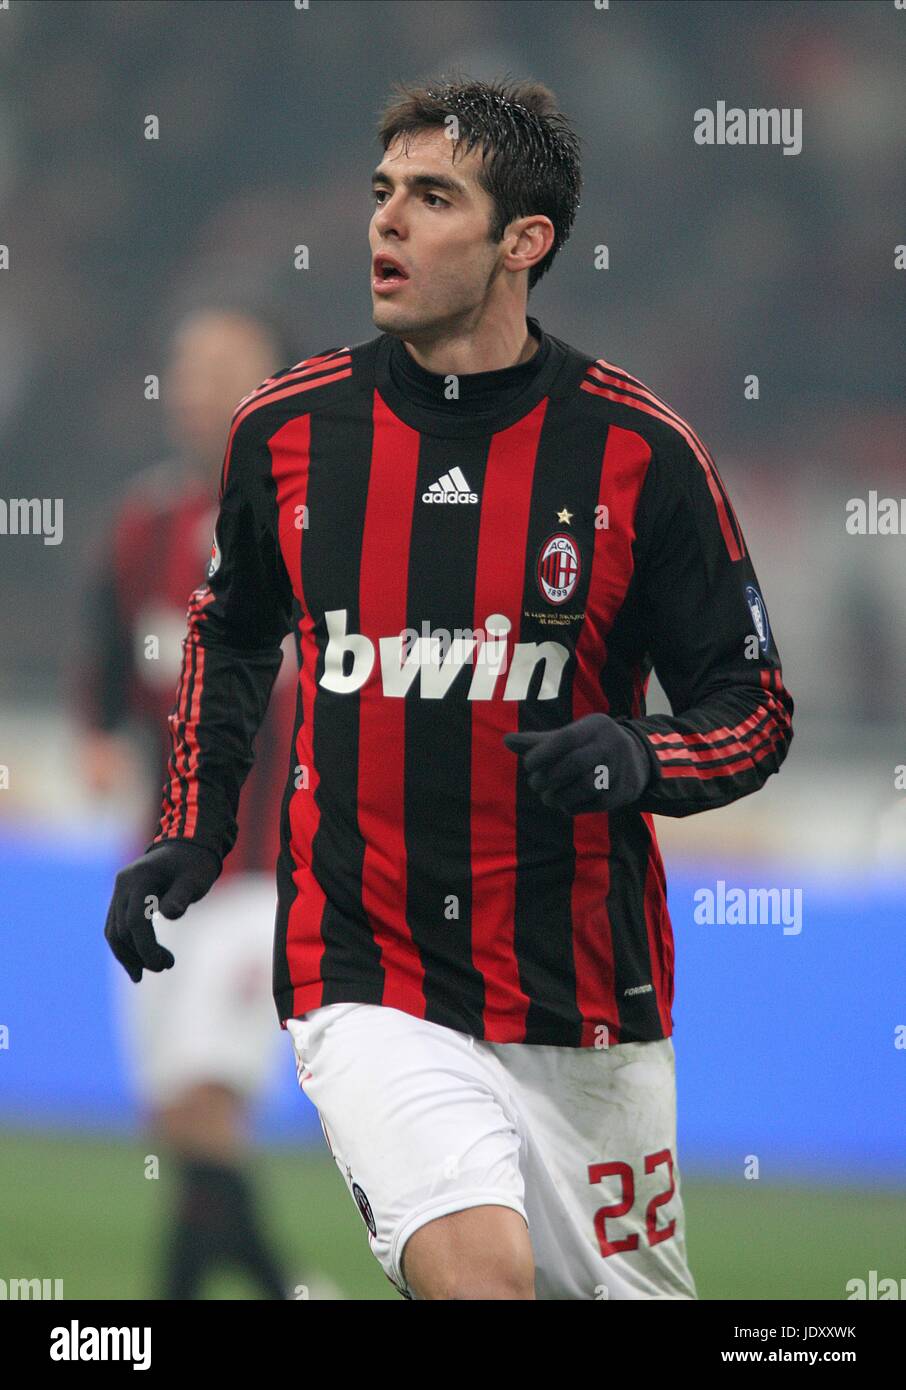 Ac milan hi-res stock photography and images - Alamy